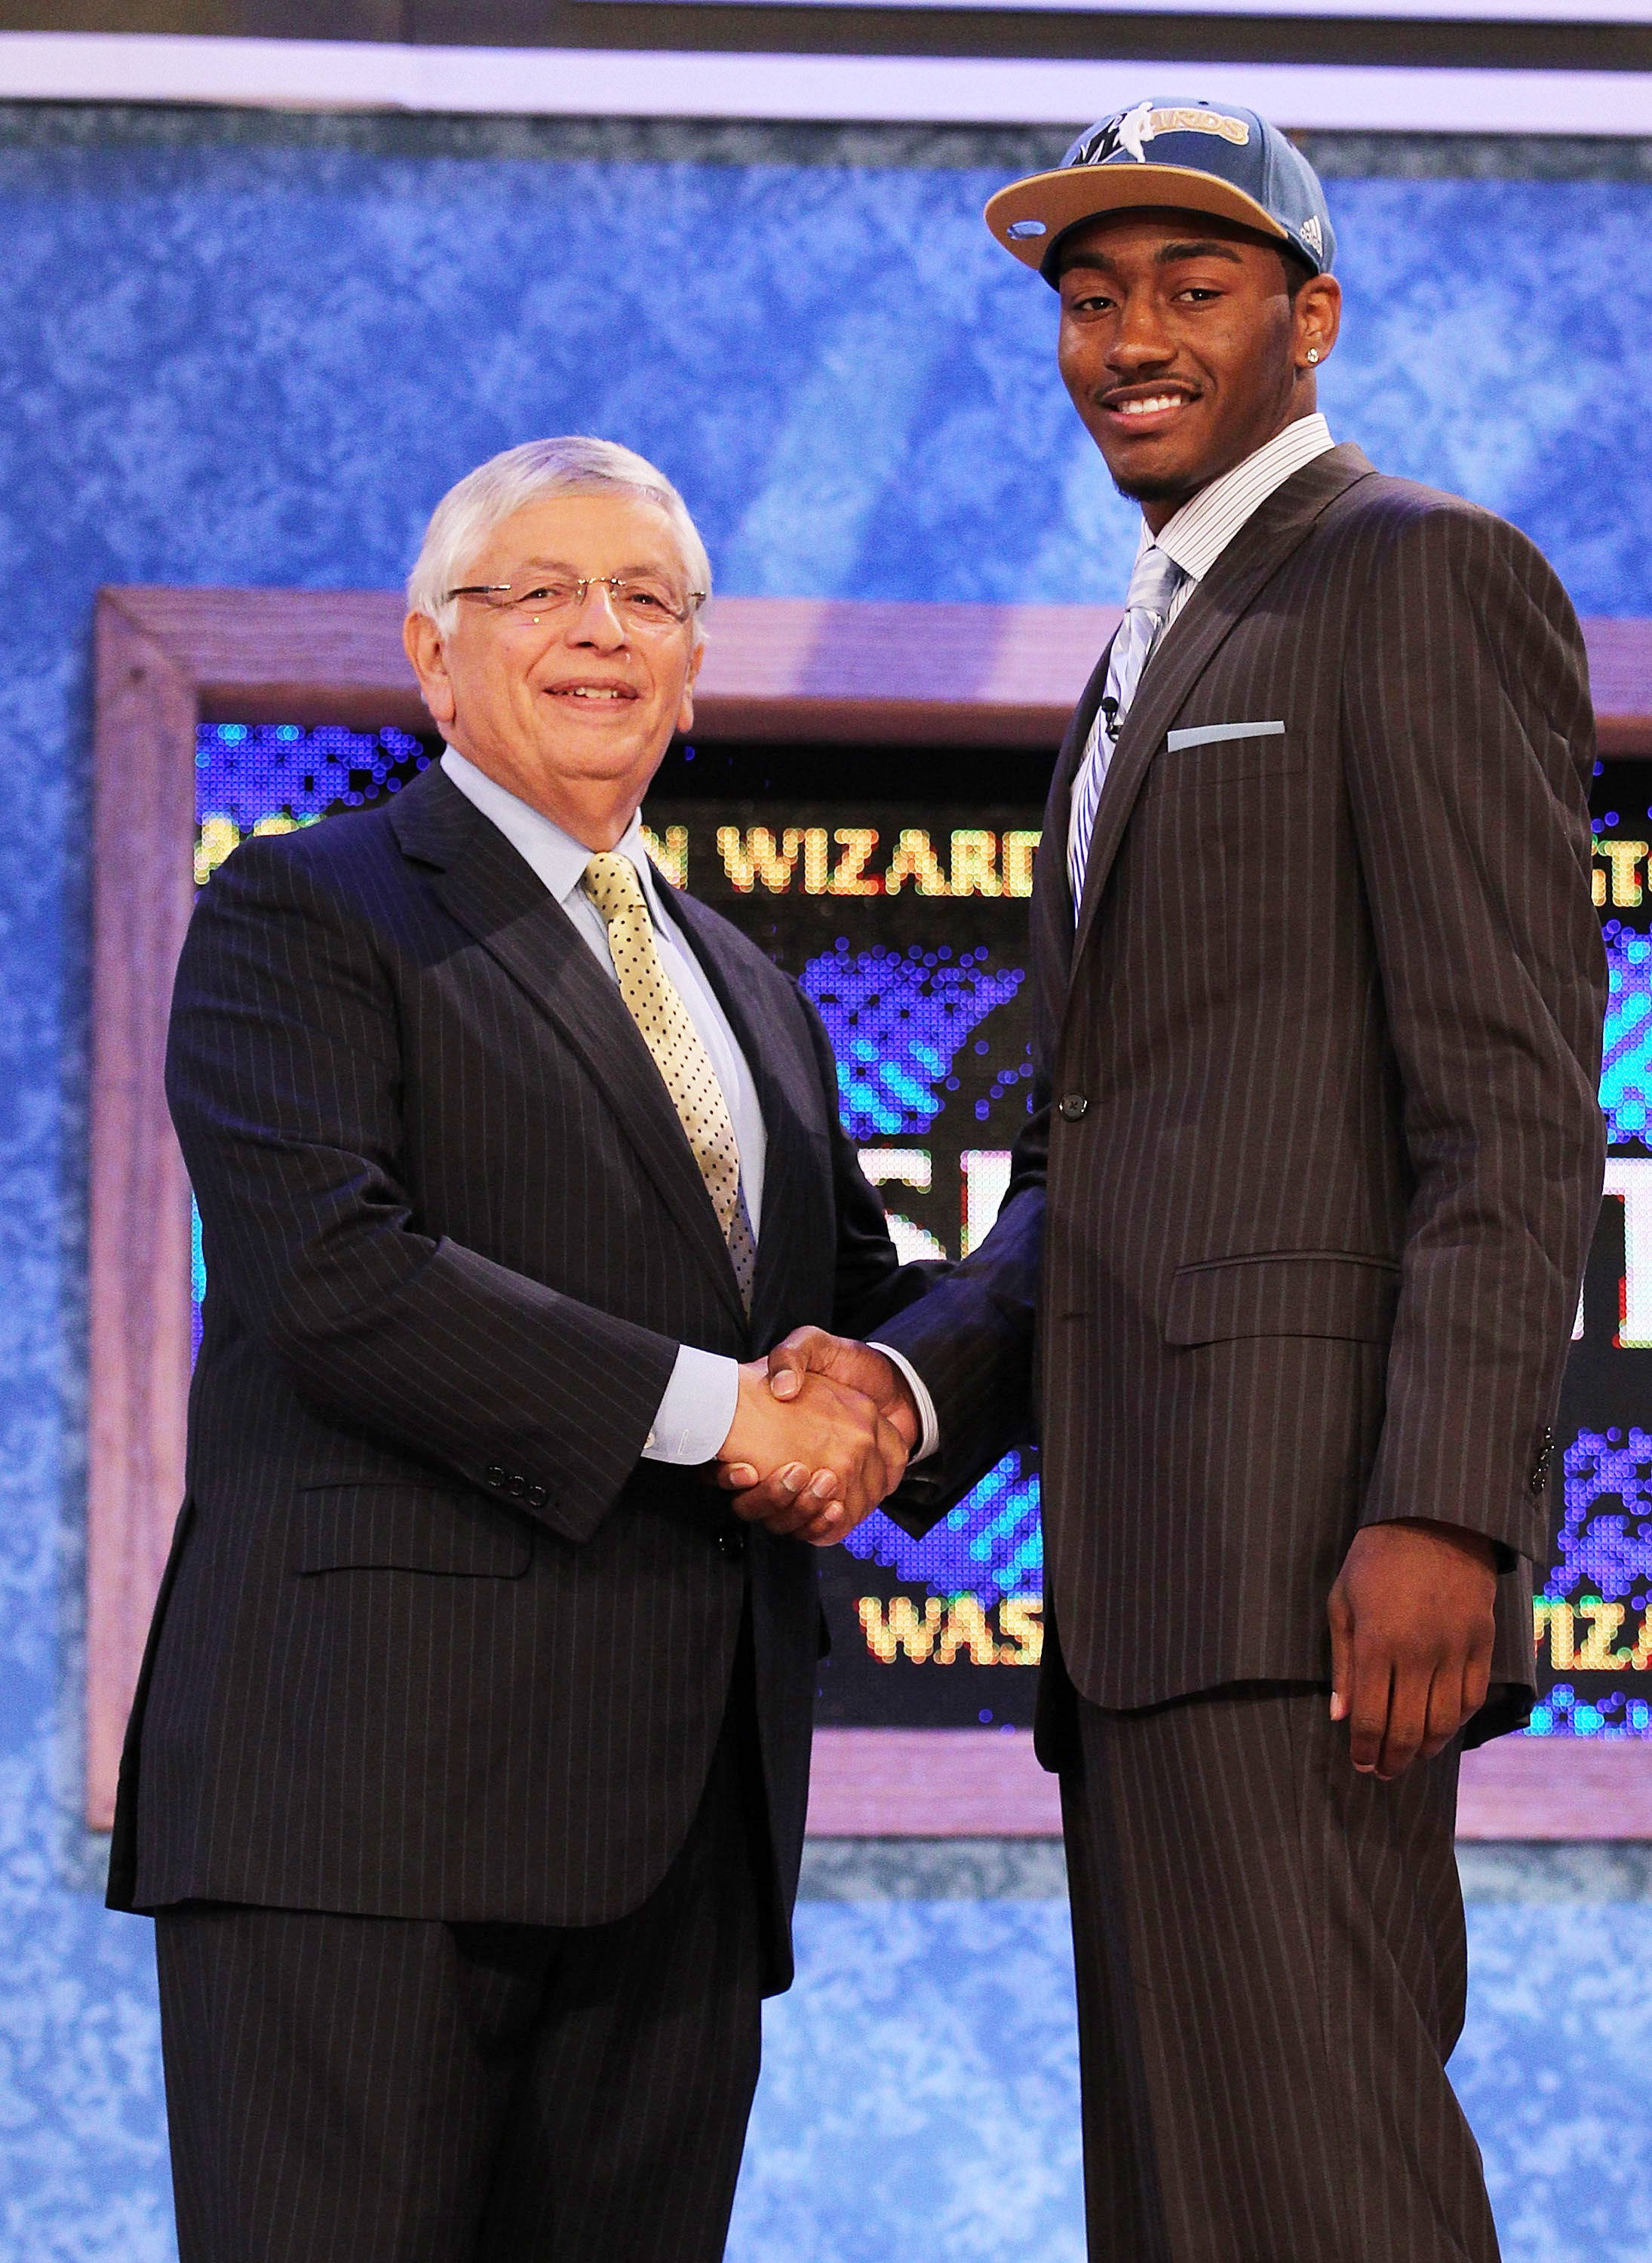 NEW YORK - JUNE 24:  John Wall of Kentucky stands with NBA Commisioner David Stern after being drafted with the first pick by The Washington Wizards at Madison Square Garden on June 24, 2010 in New York, New York City. NOTE TO USER: User expressly acknowl